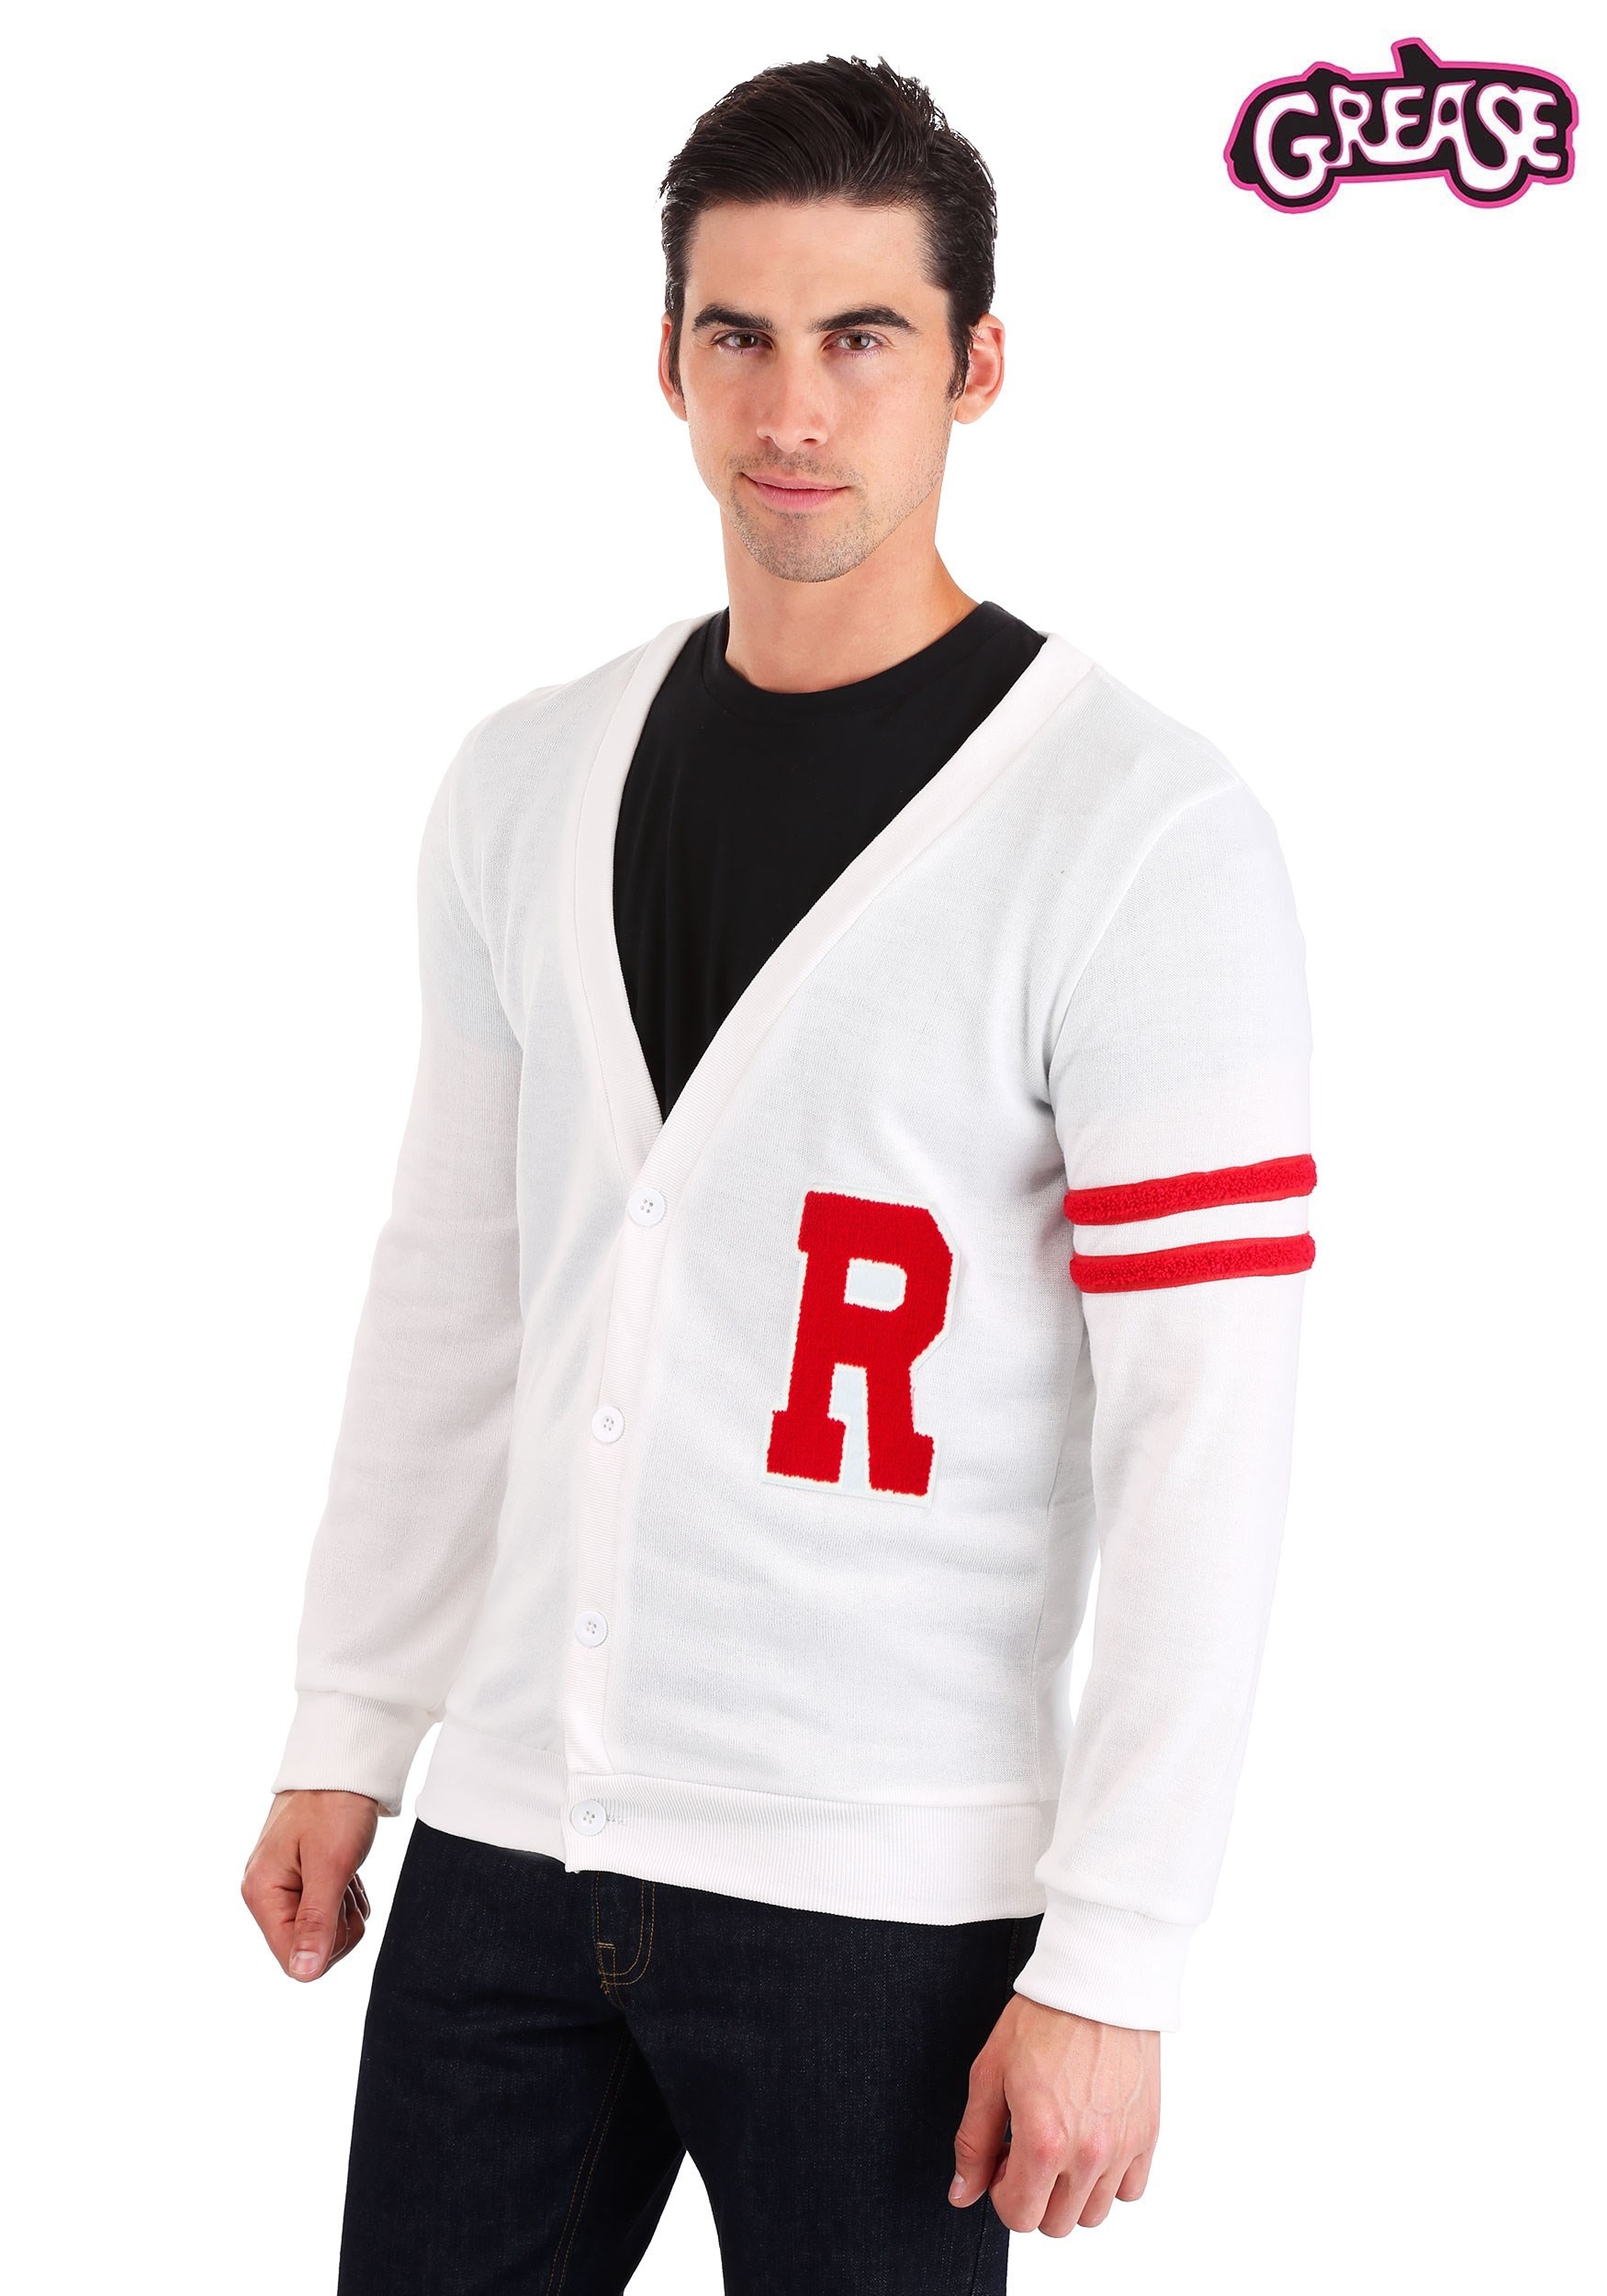 Deluxe Grease Rydell High Men’s Plus Size Letterman Sweater